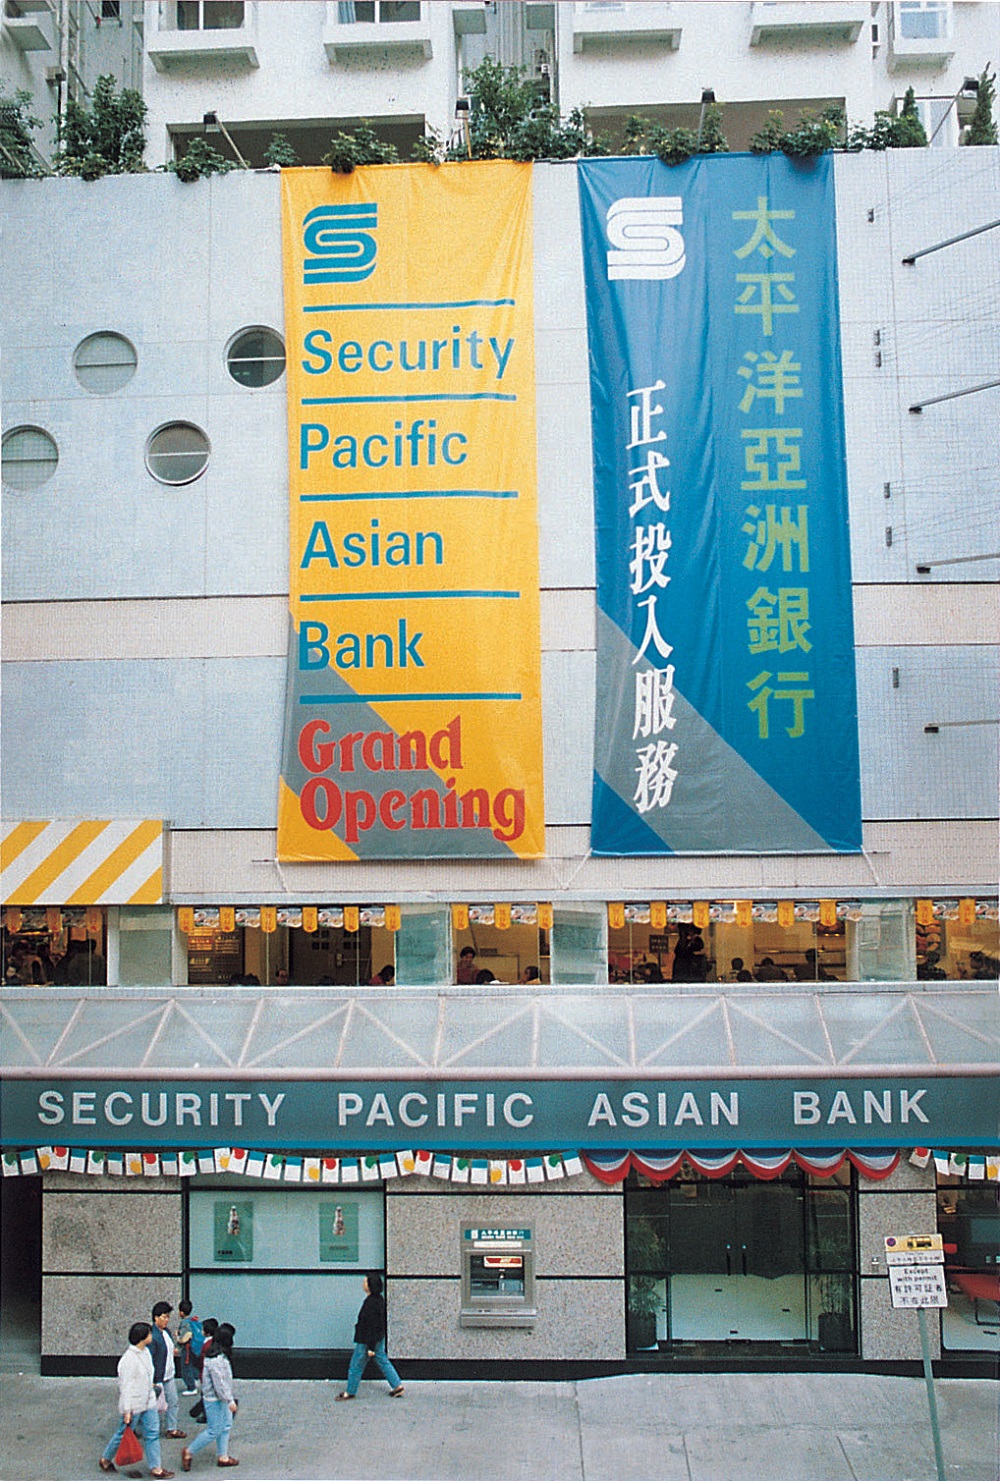 The inauguration of Security Pacific Asian Bank